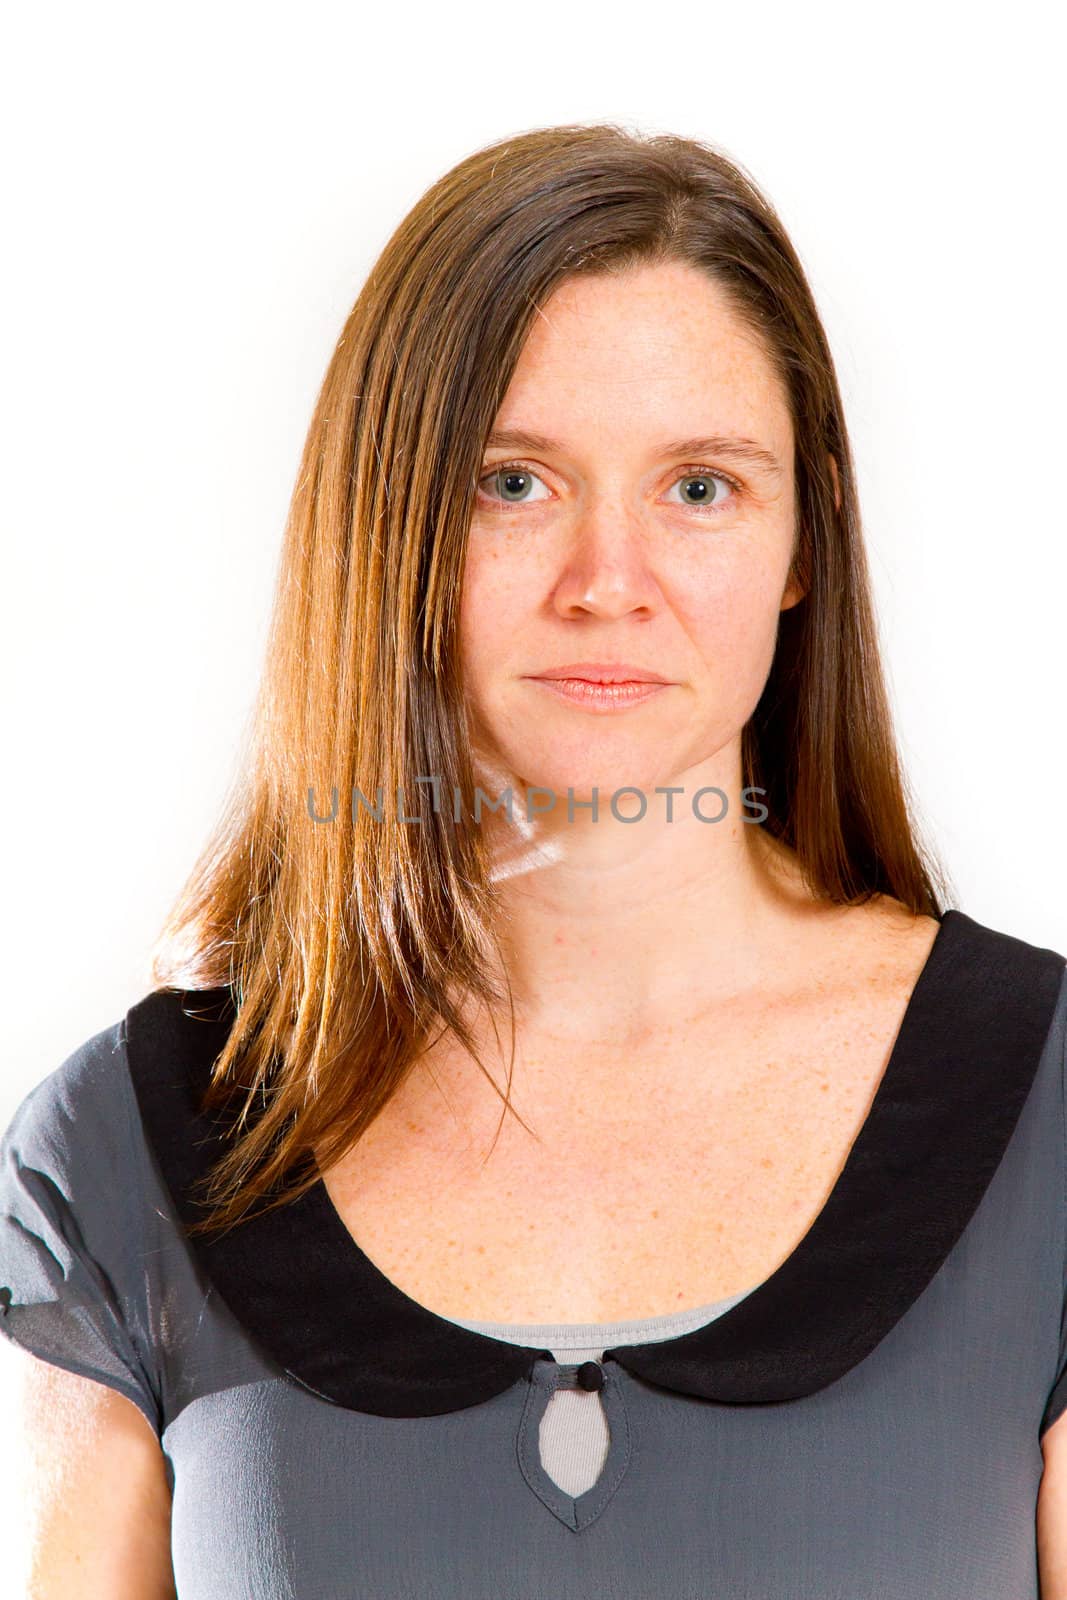 A pretty woman poses for a portrait in the studio against an isolated white background while wearing black and grey and looking happy.